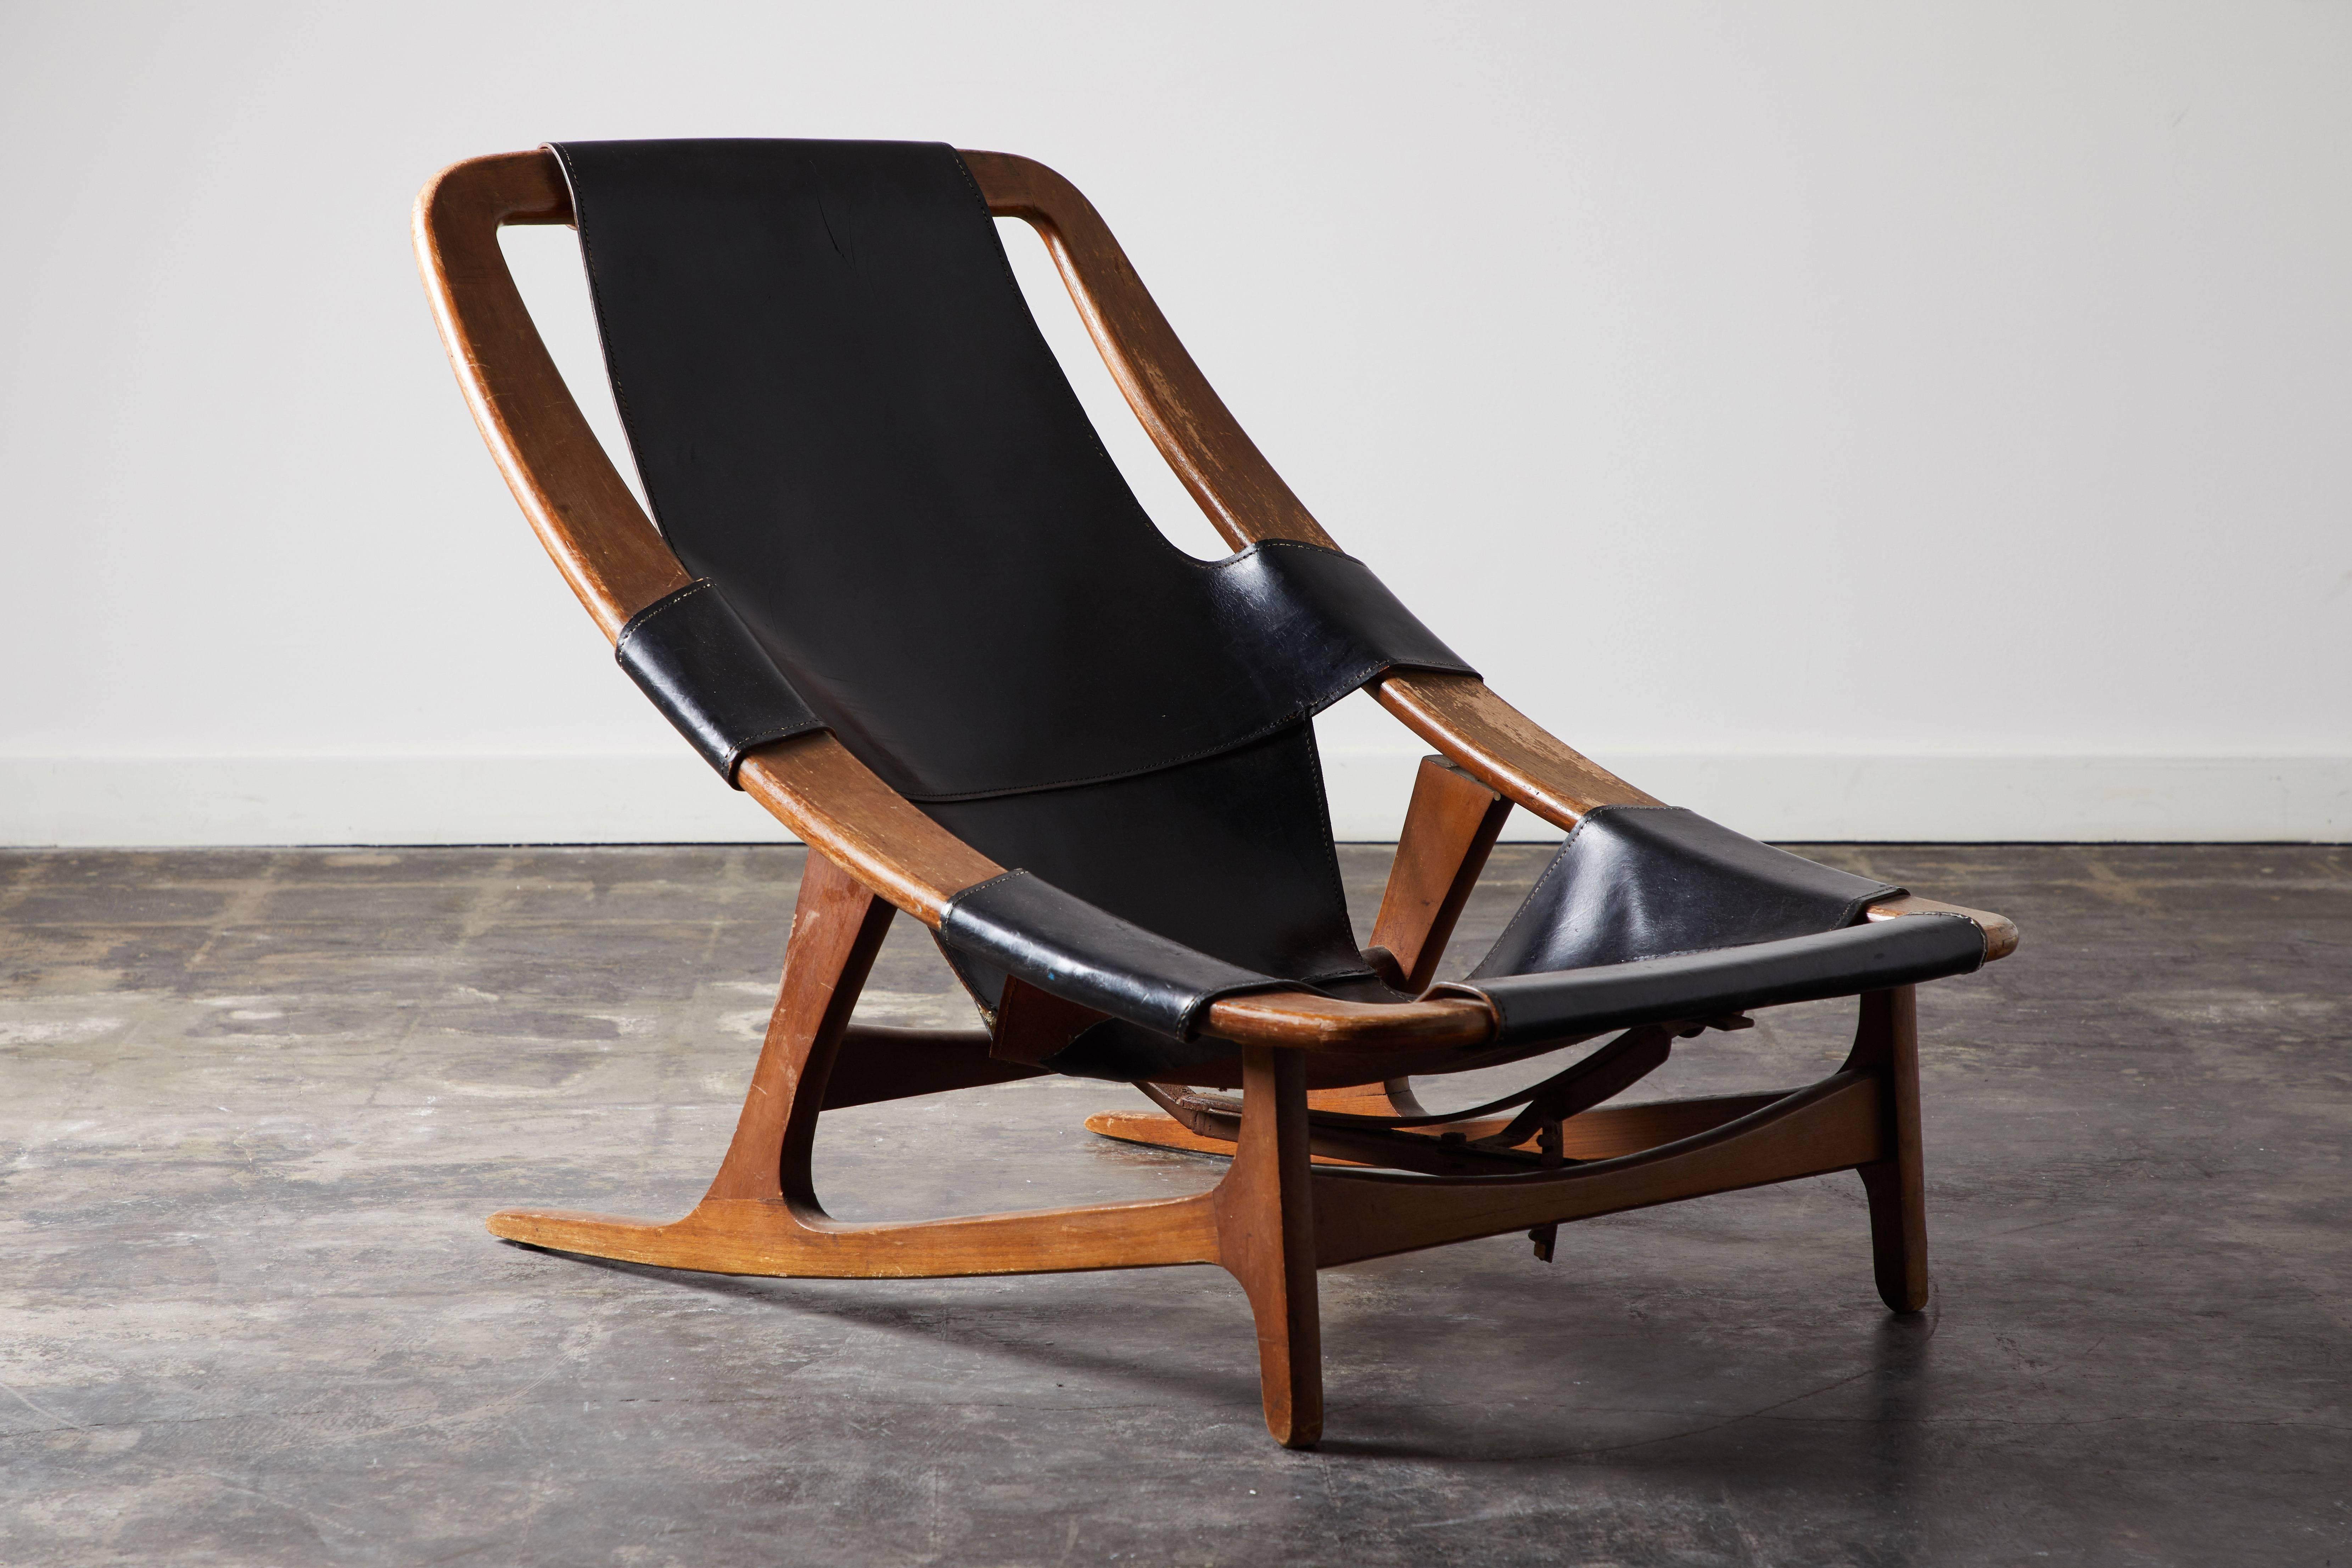 Adjustable teak and leather Holmenkollen lounge chair by Arne Tidemand-Ruud for Isa. Made in Italy, circa 1950s.